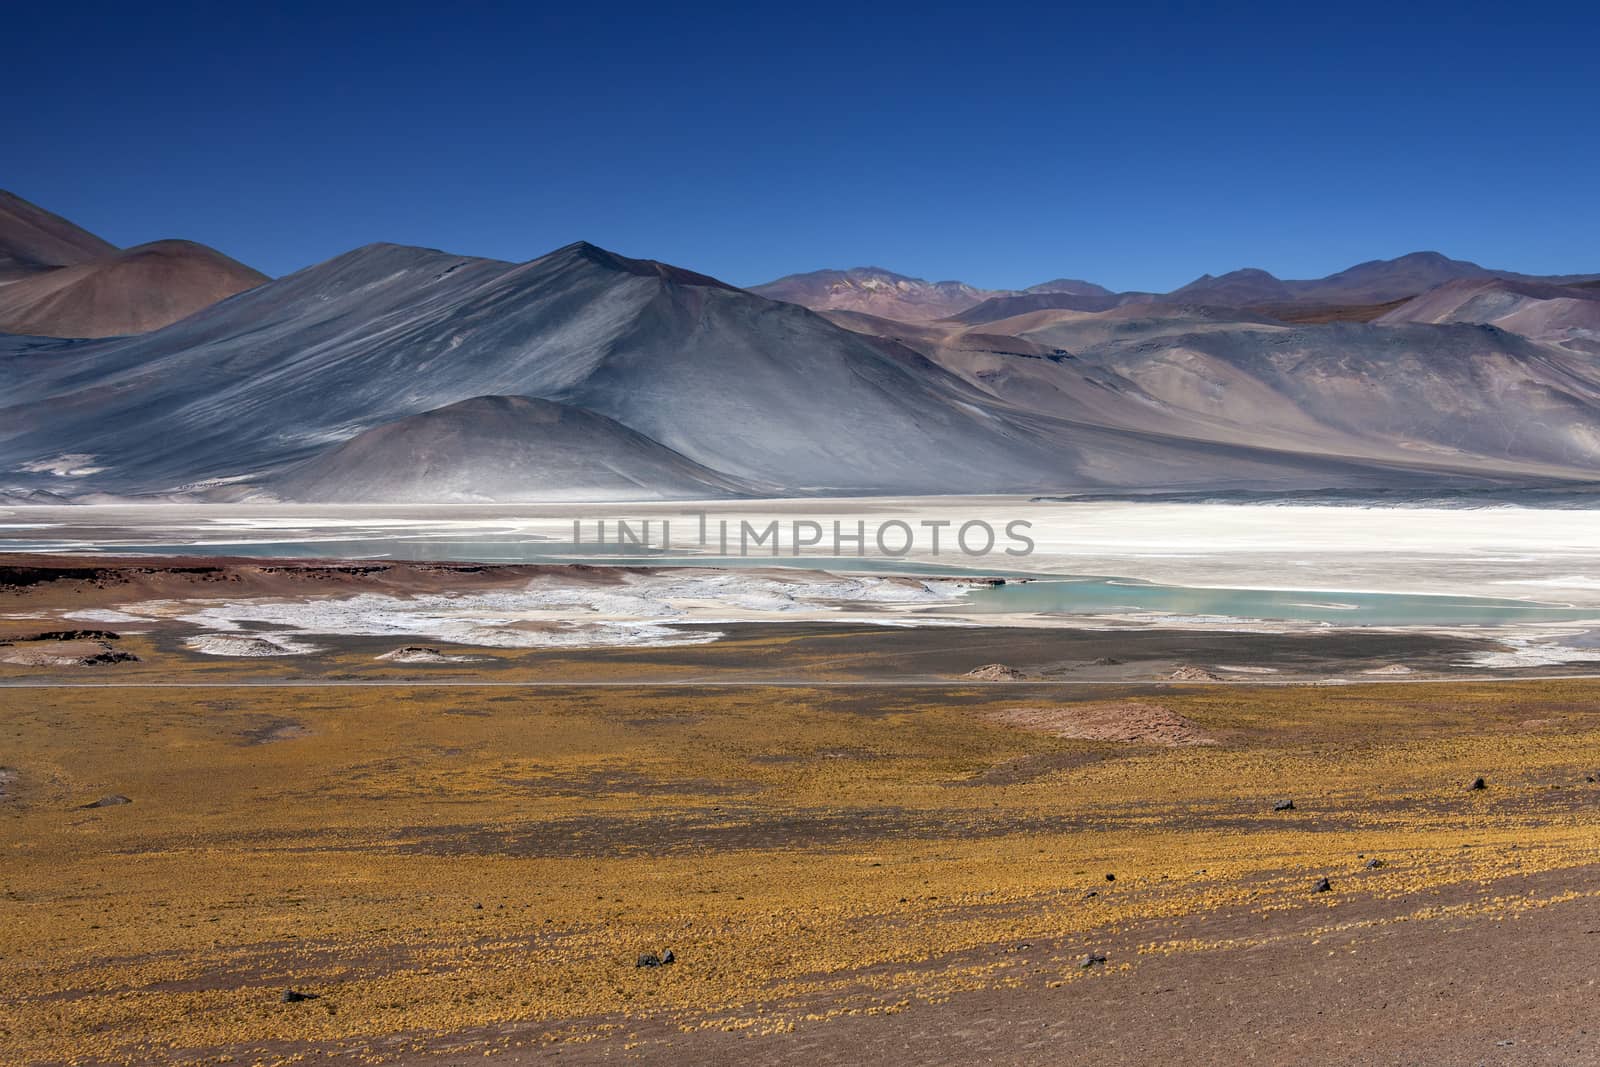 Alues Calientes high on the altiplano in the Atacama Desert in northern Chile. The white areas are deposits of salt.
